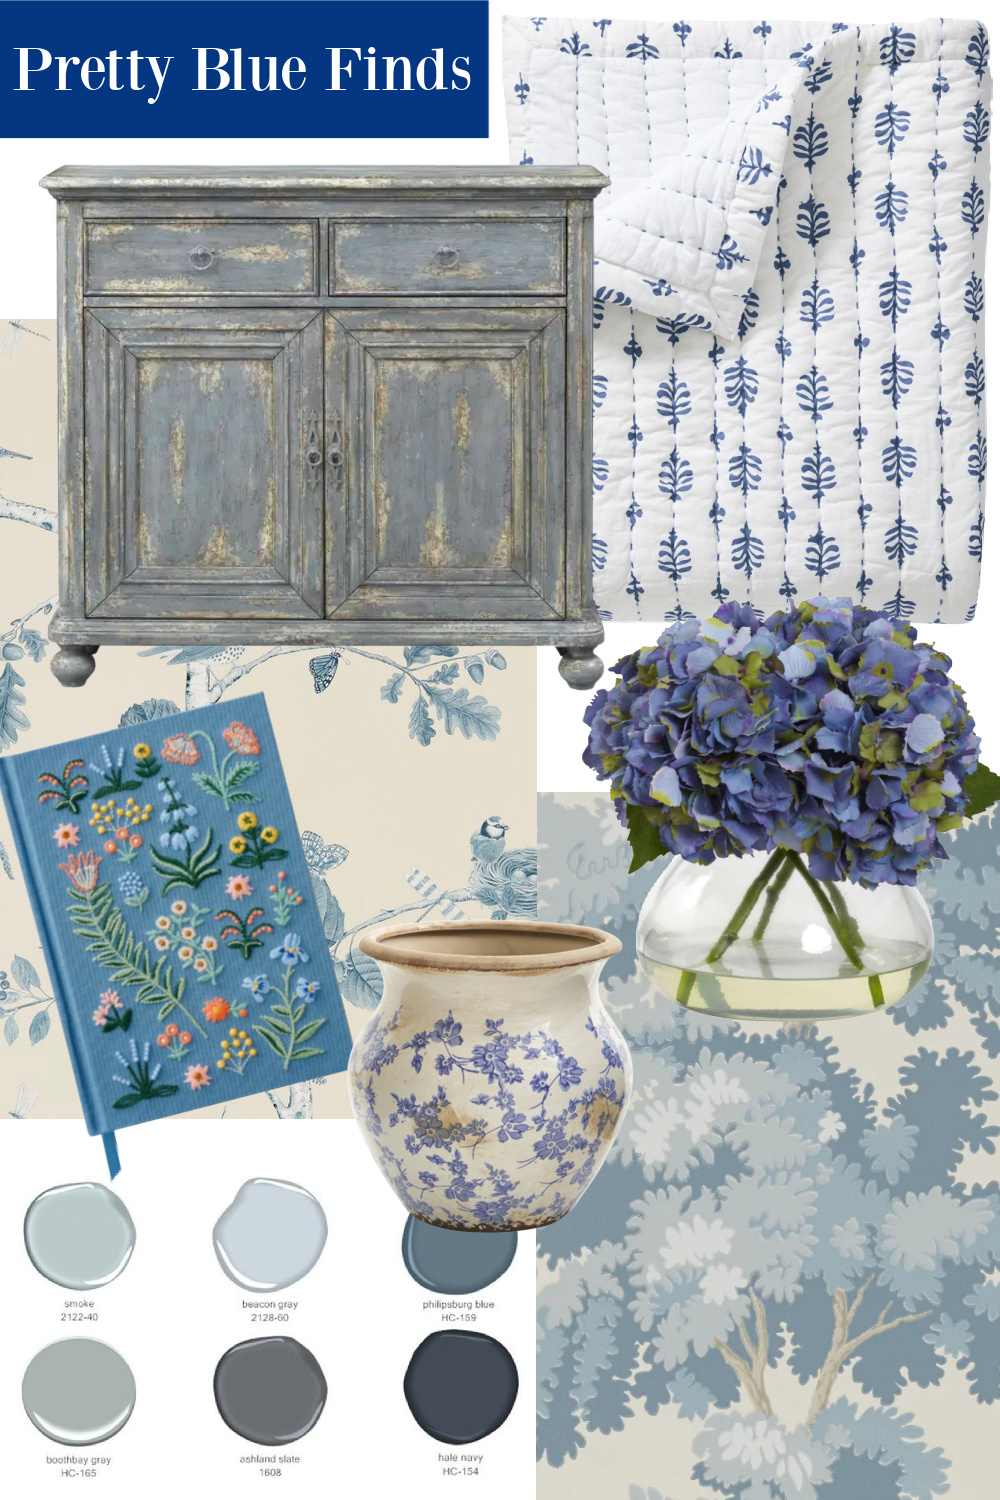 Pretty Blue Finds for Home on Hello Lovely Studio. #shopthelook #bluedecor